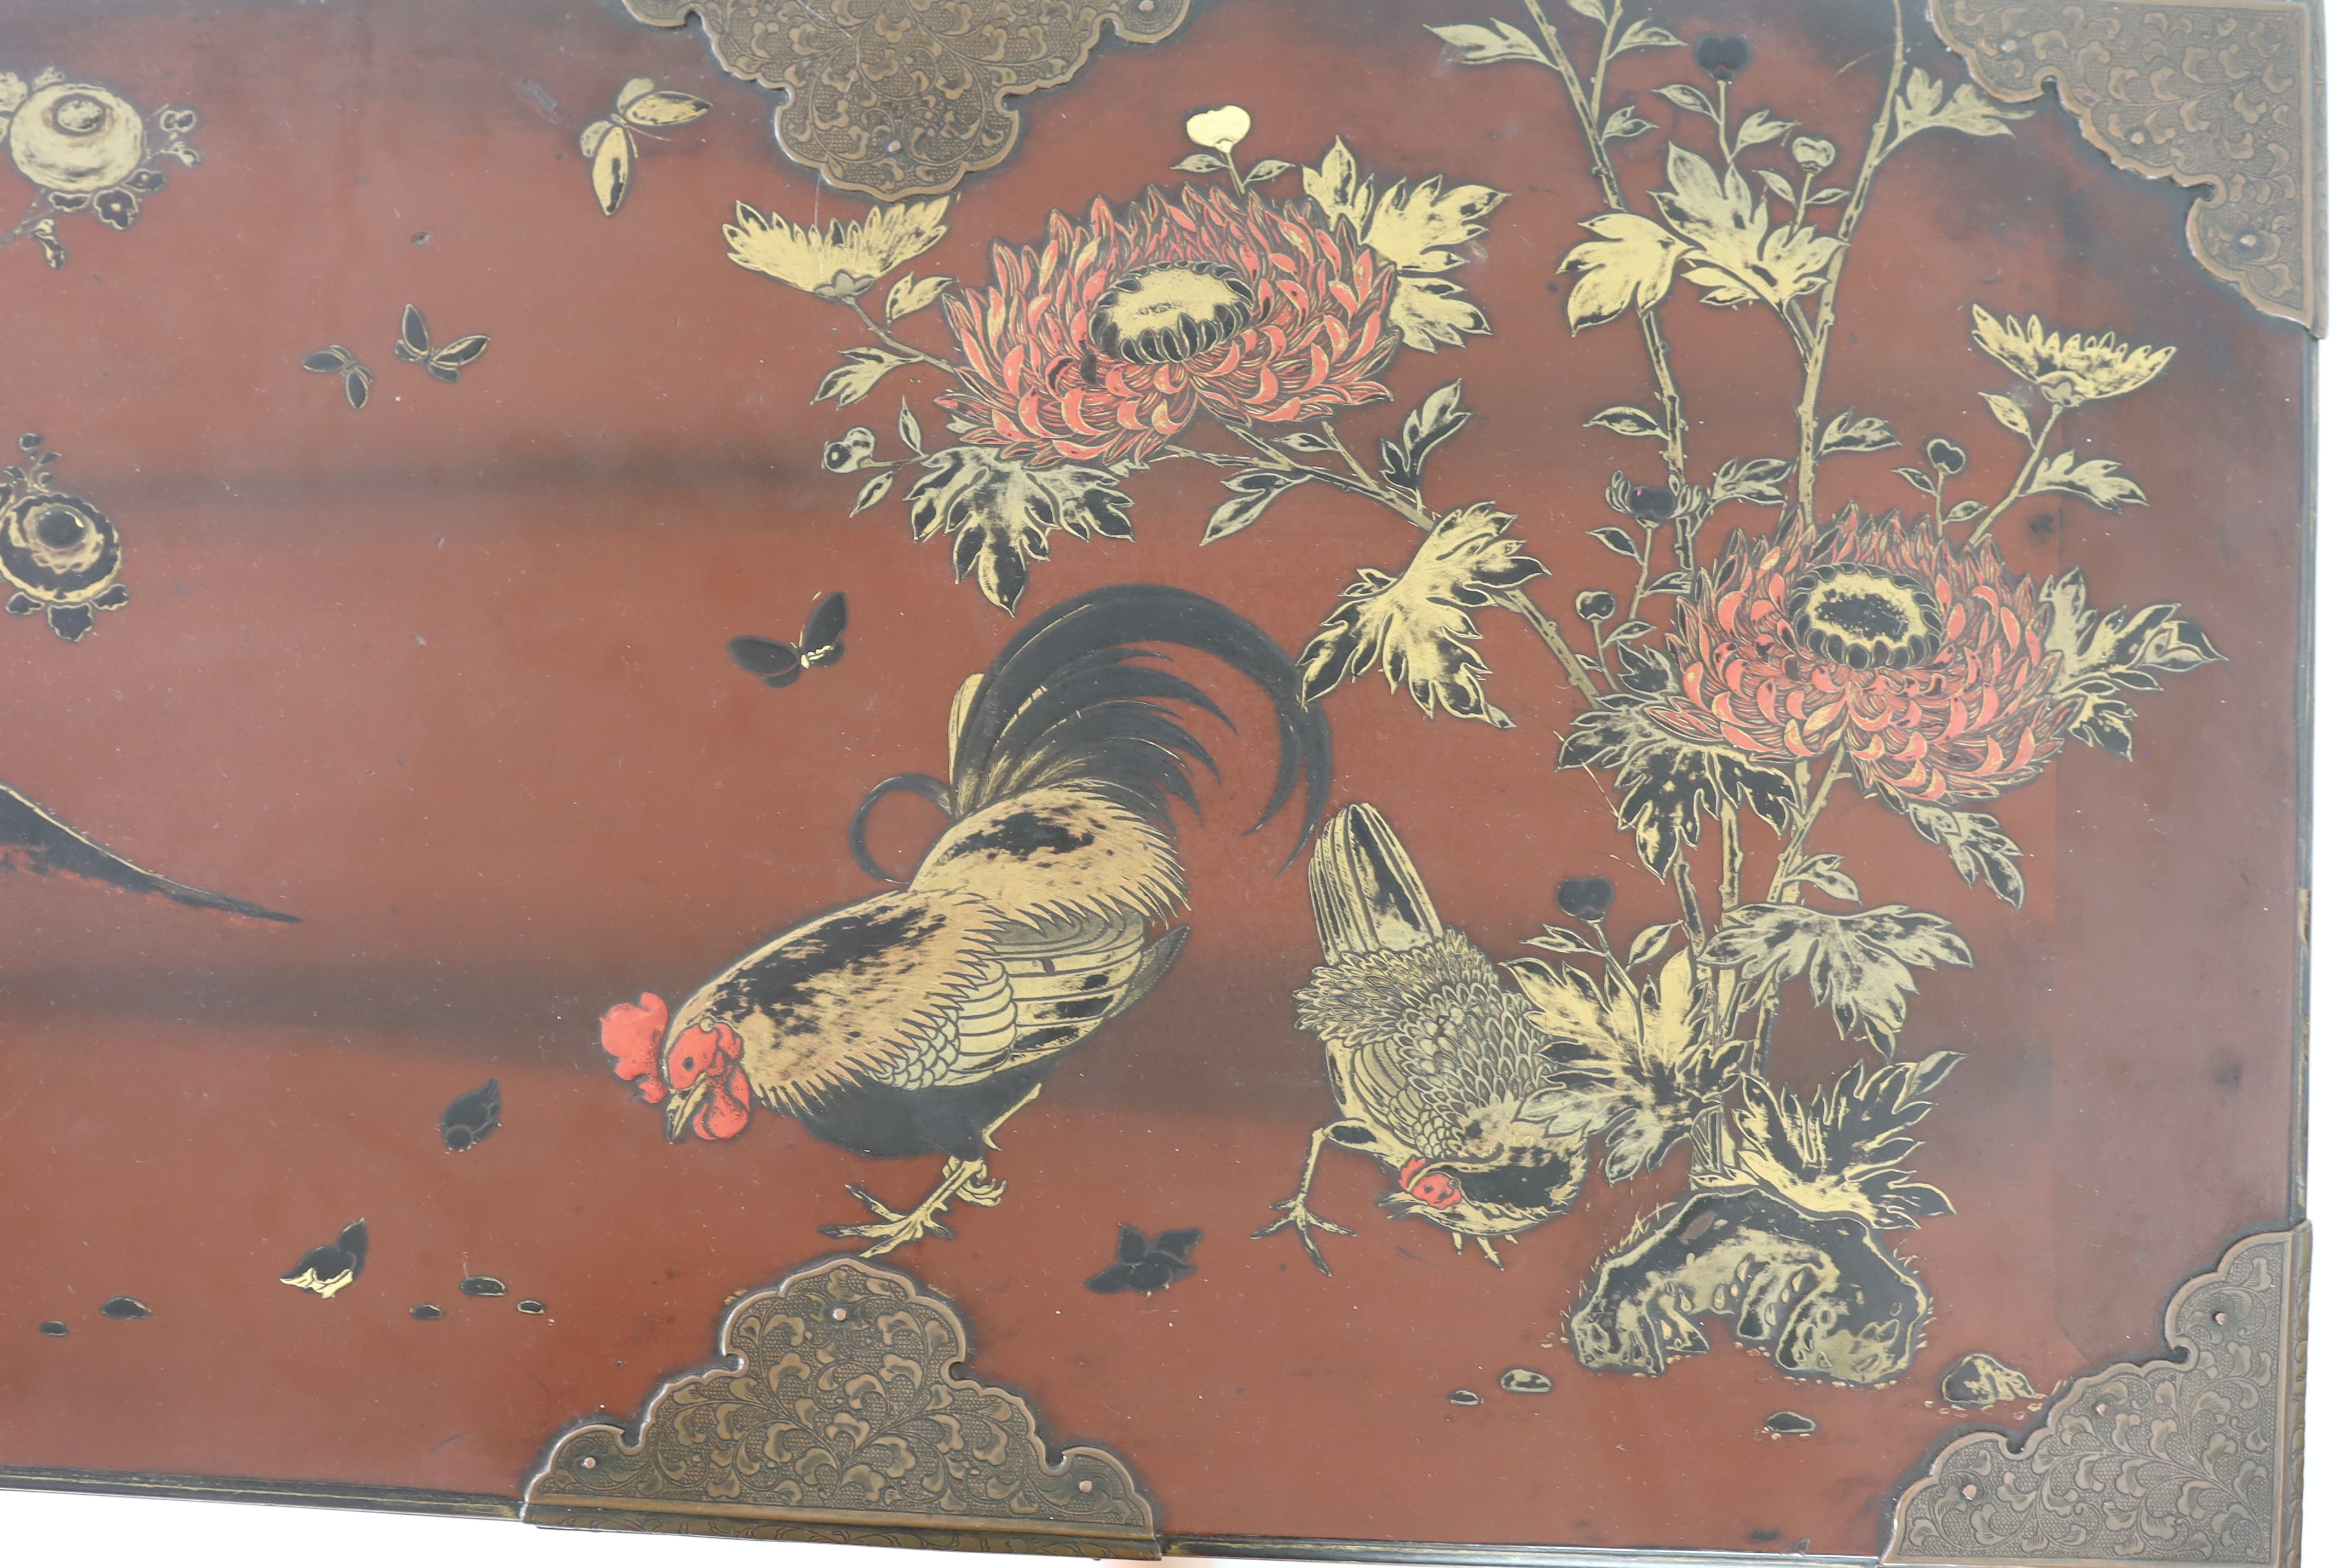 A Japanese Meiji period lacquered table cabinet, Meiji period, overall 60cm wide, 36cm deep, 104cm high